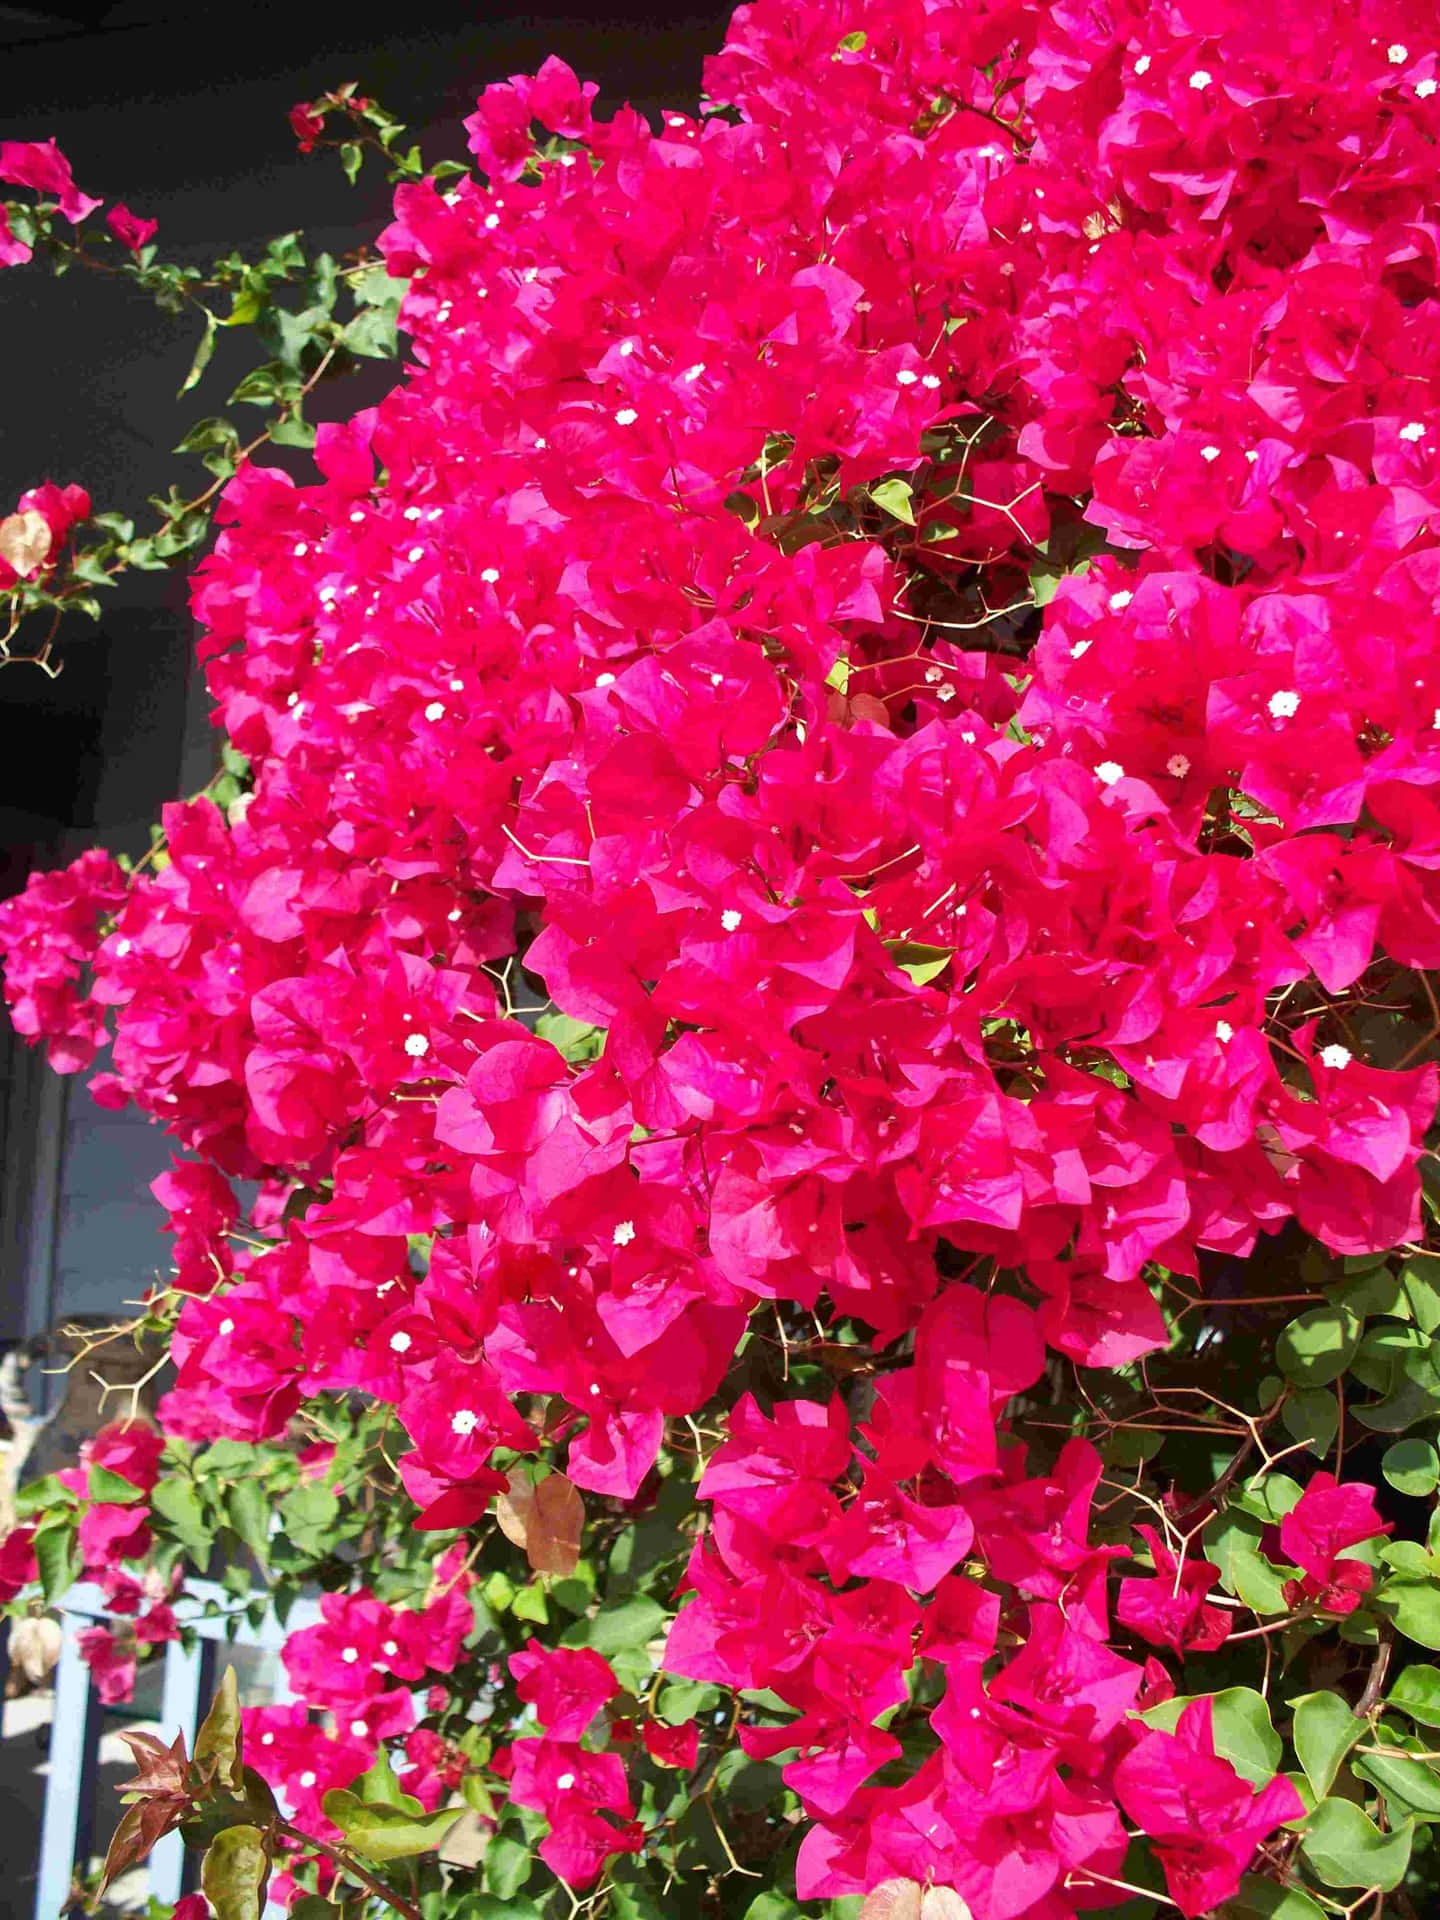 A burst of warmness and color with Bougainvillea